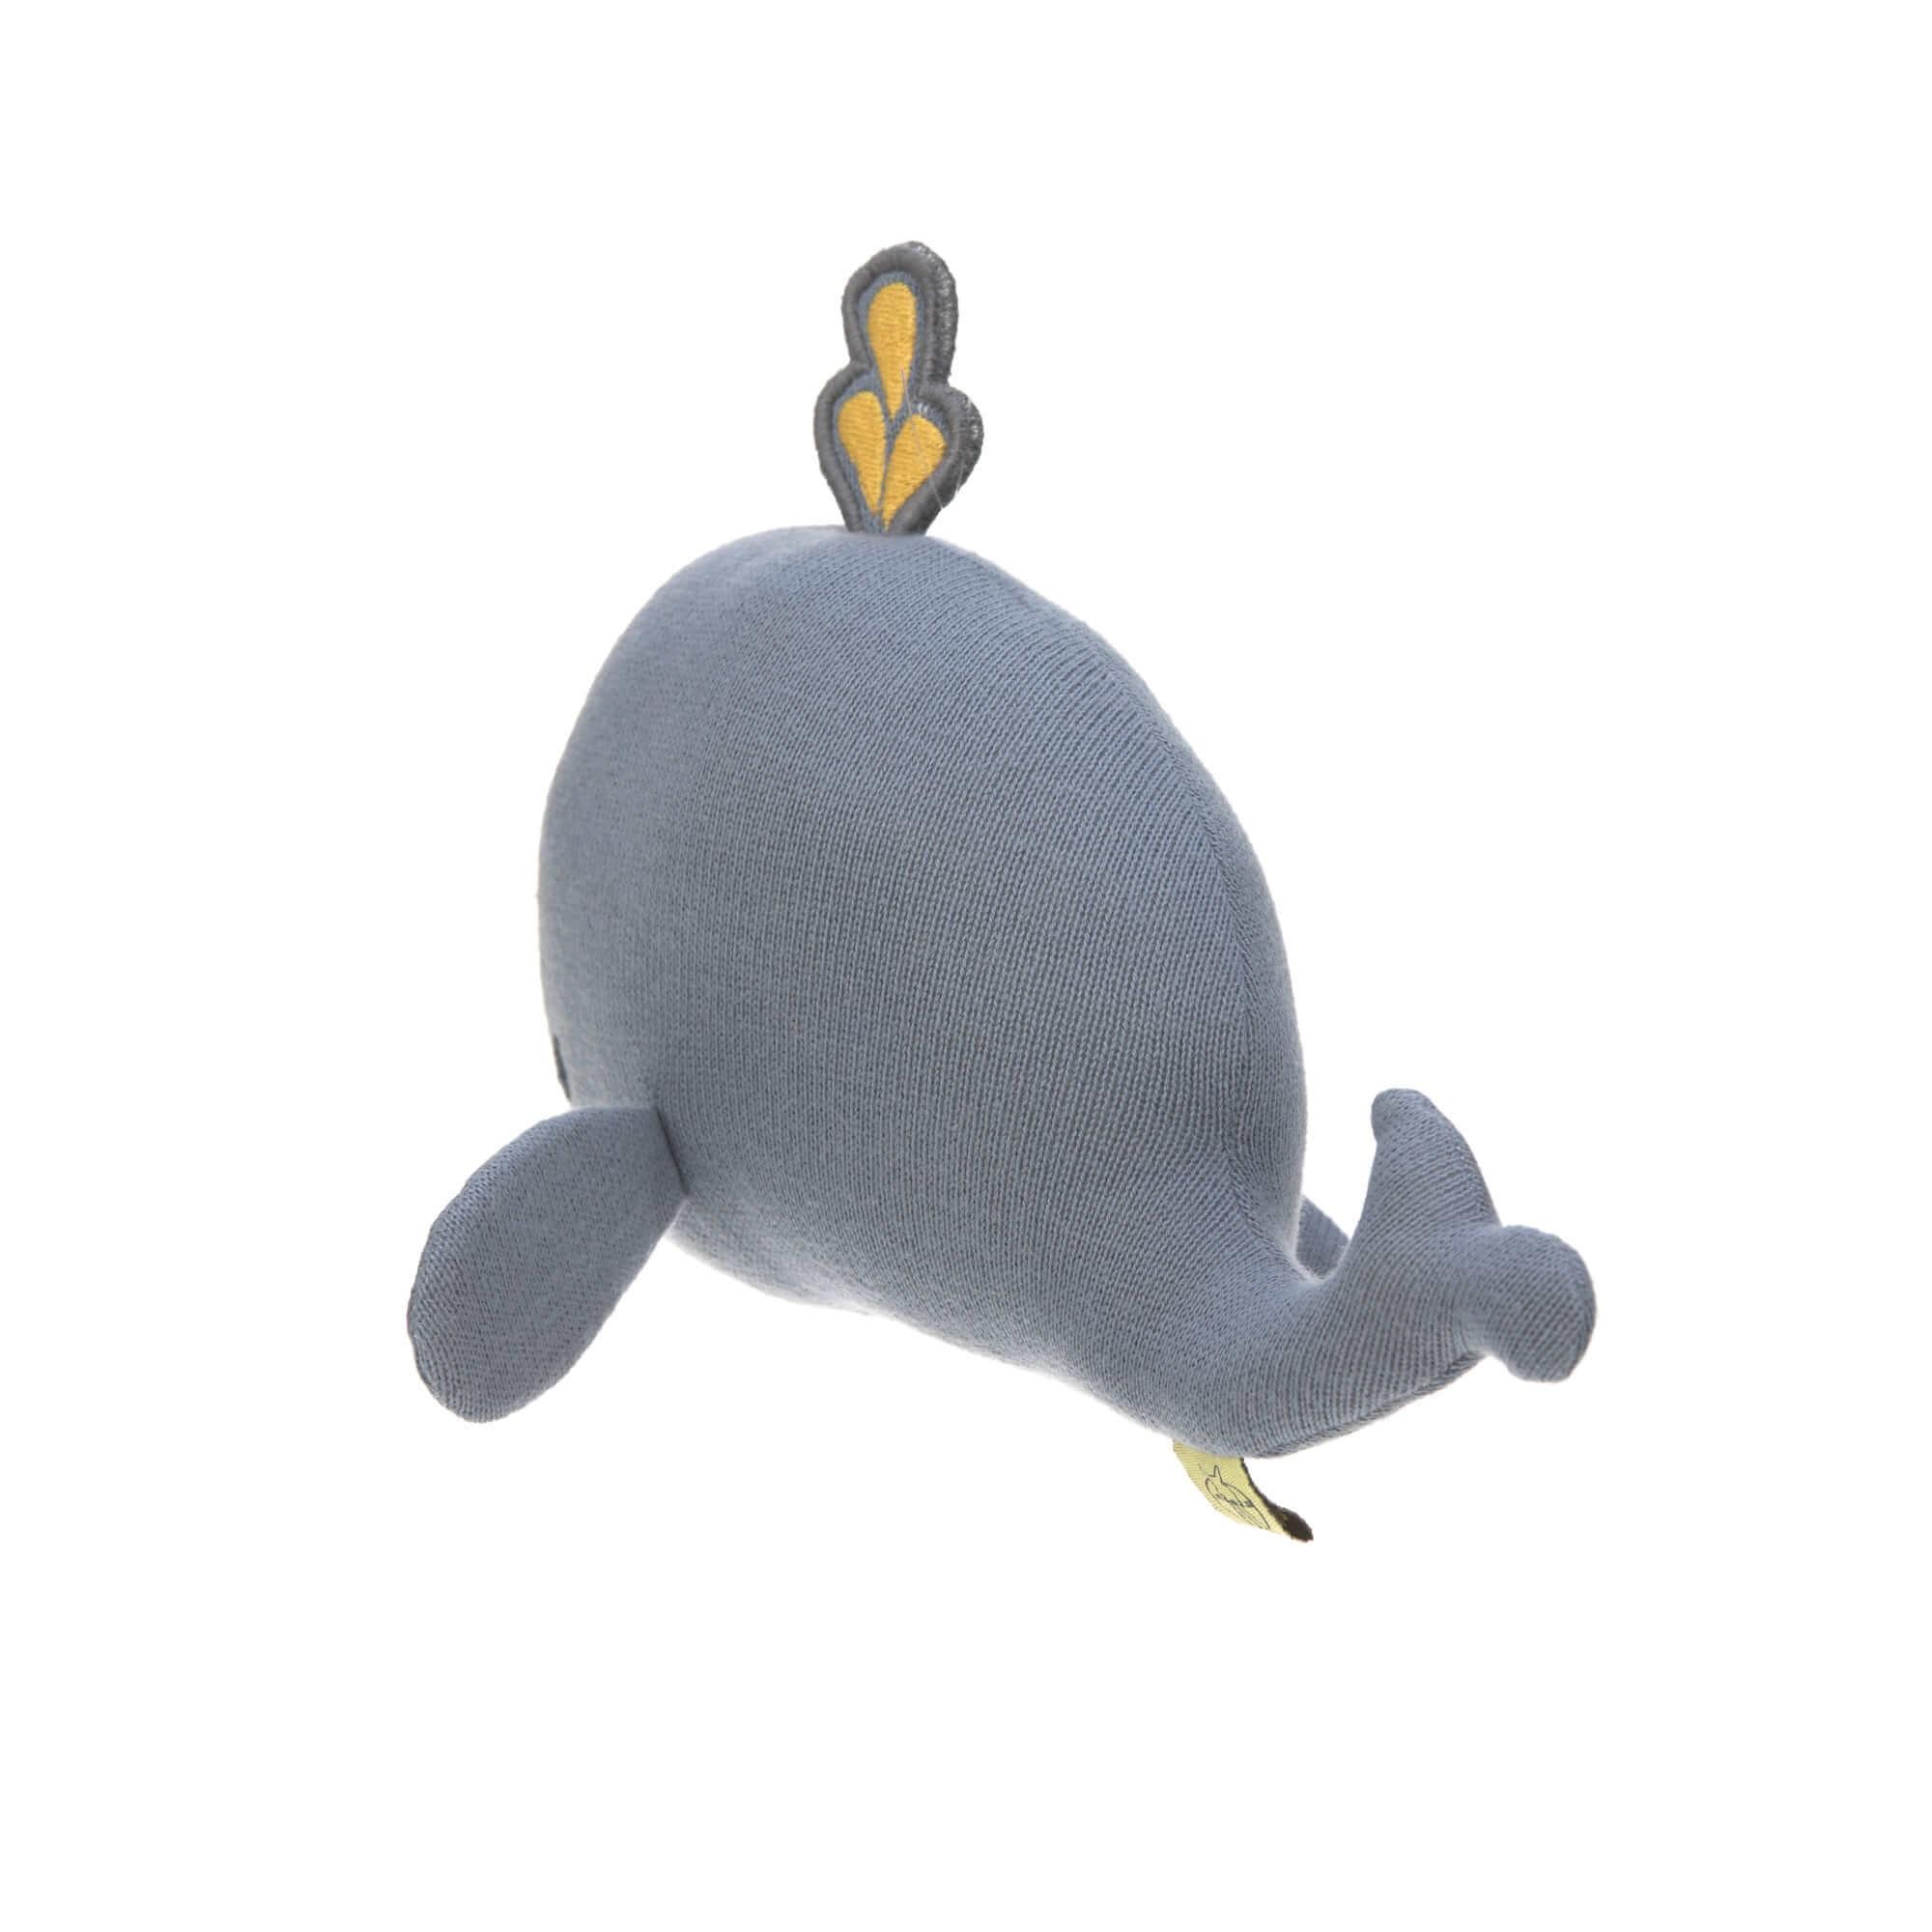 Lassig - Knitted toy with rattle/crackle little water whale